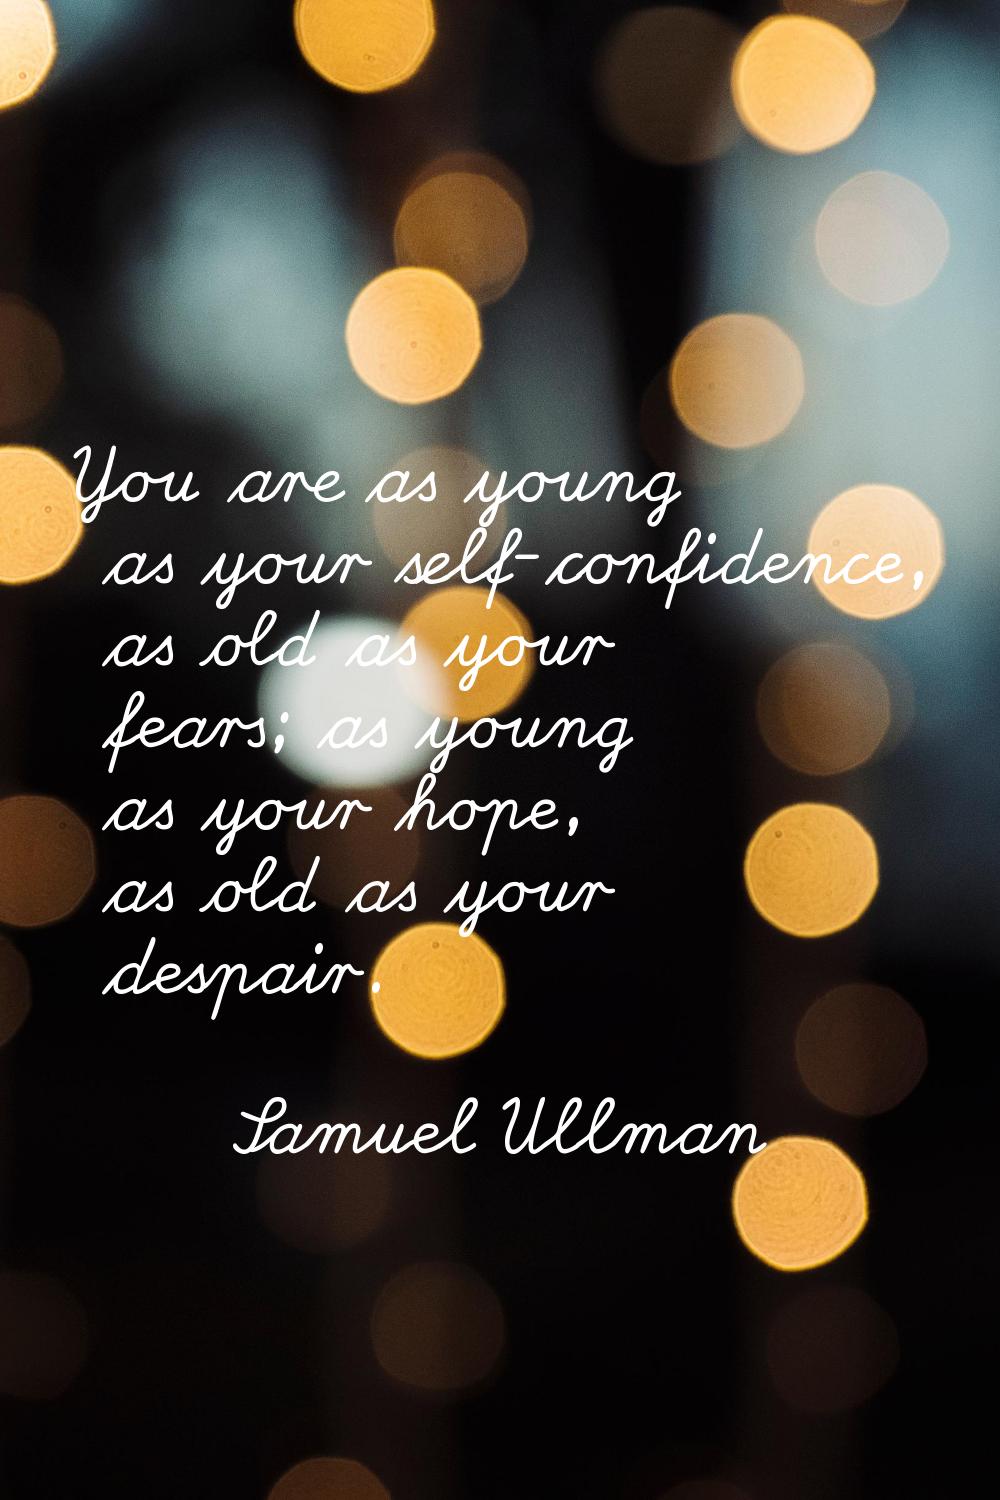 You are as young as your self-confidence, as old as your fears; as young as your hope, as old as yo